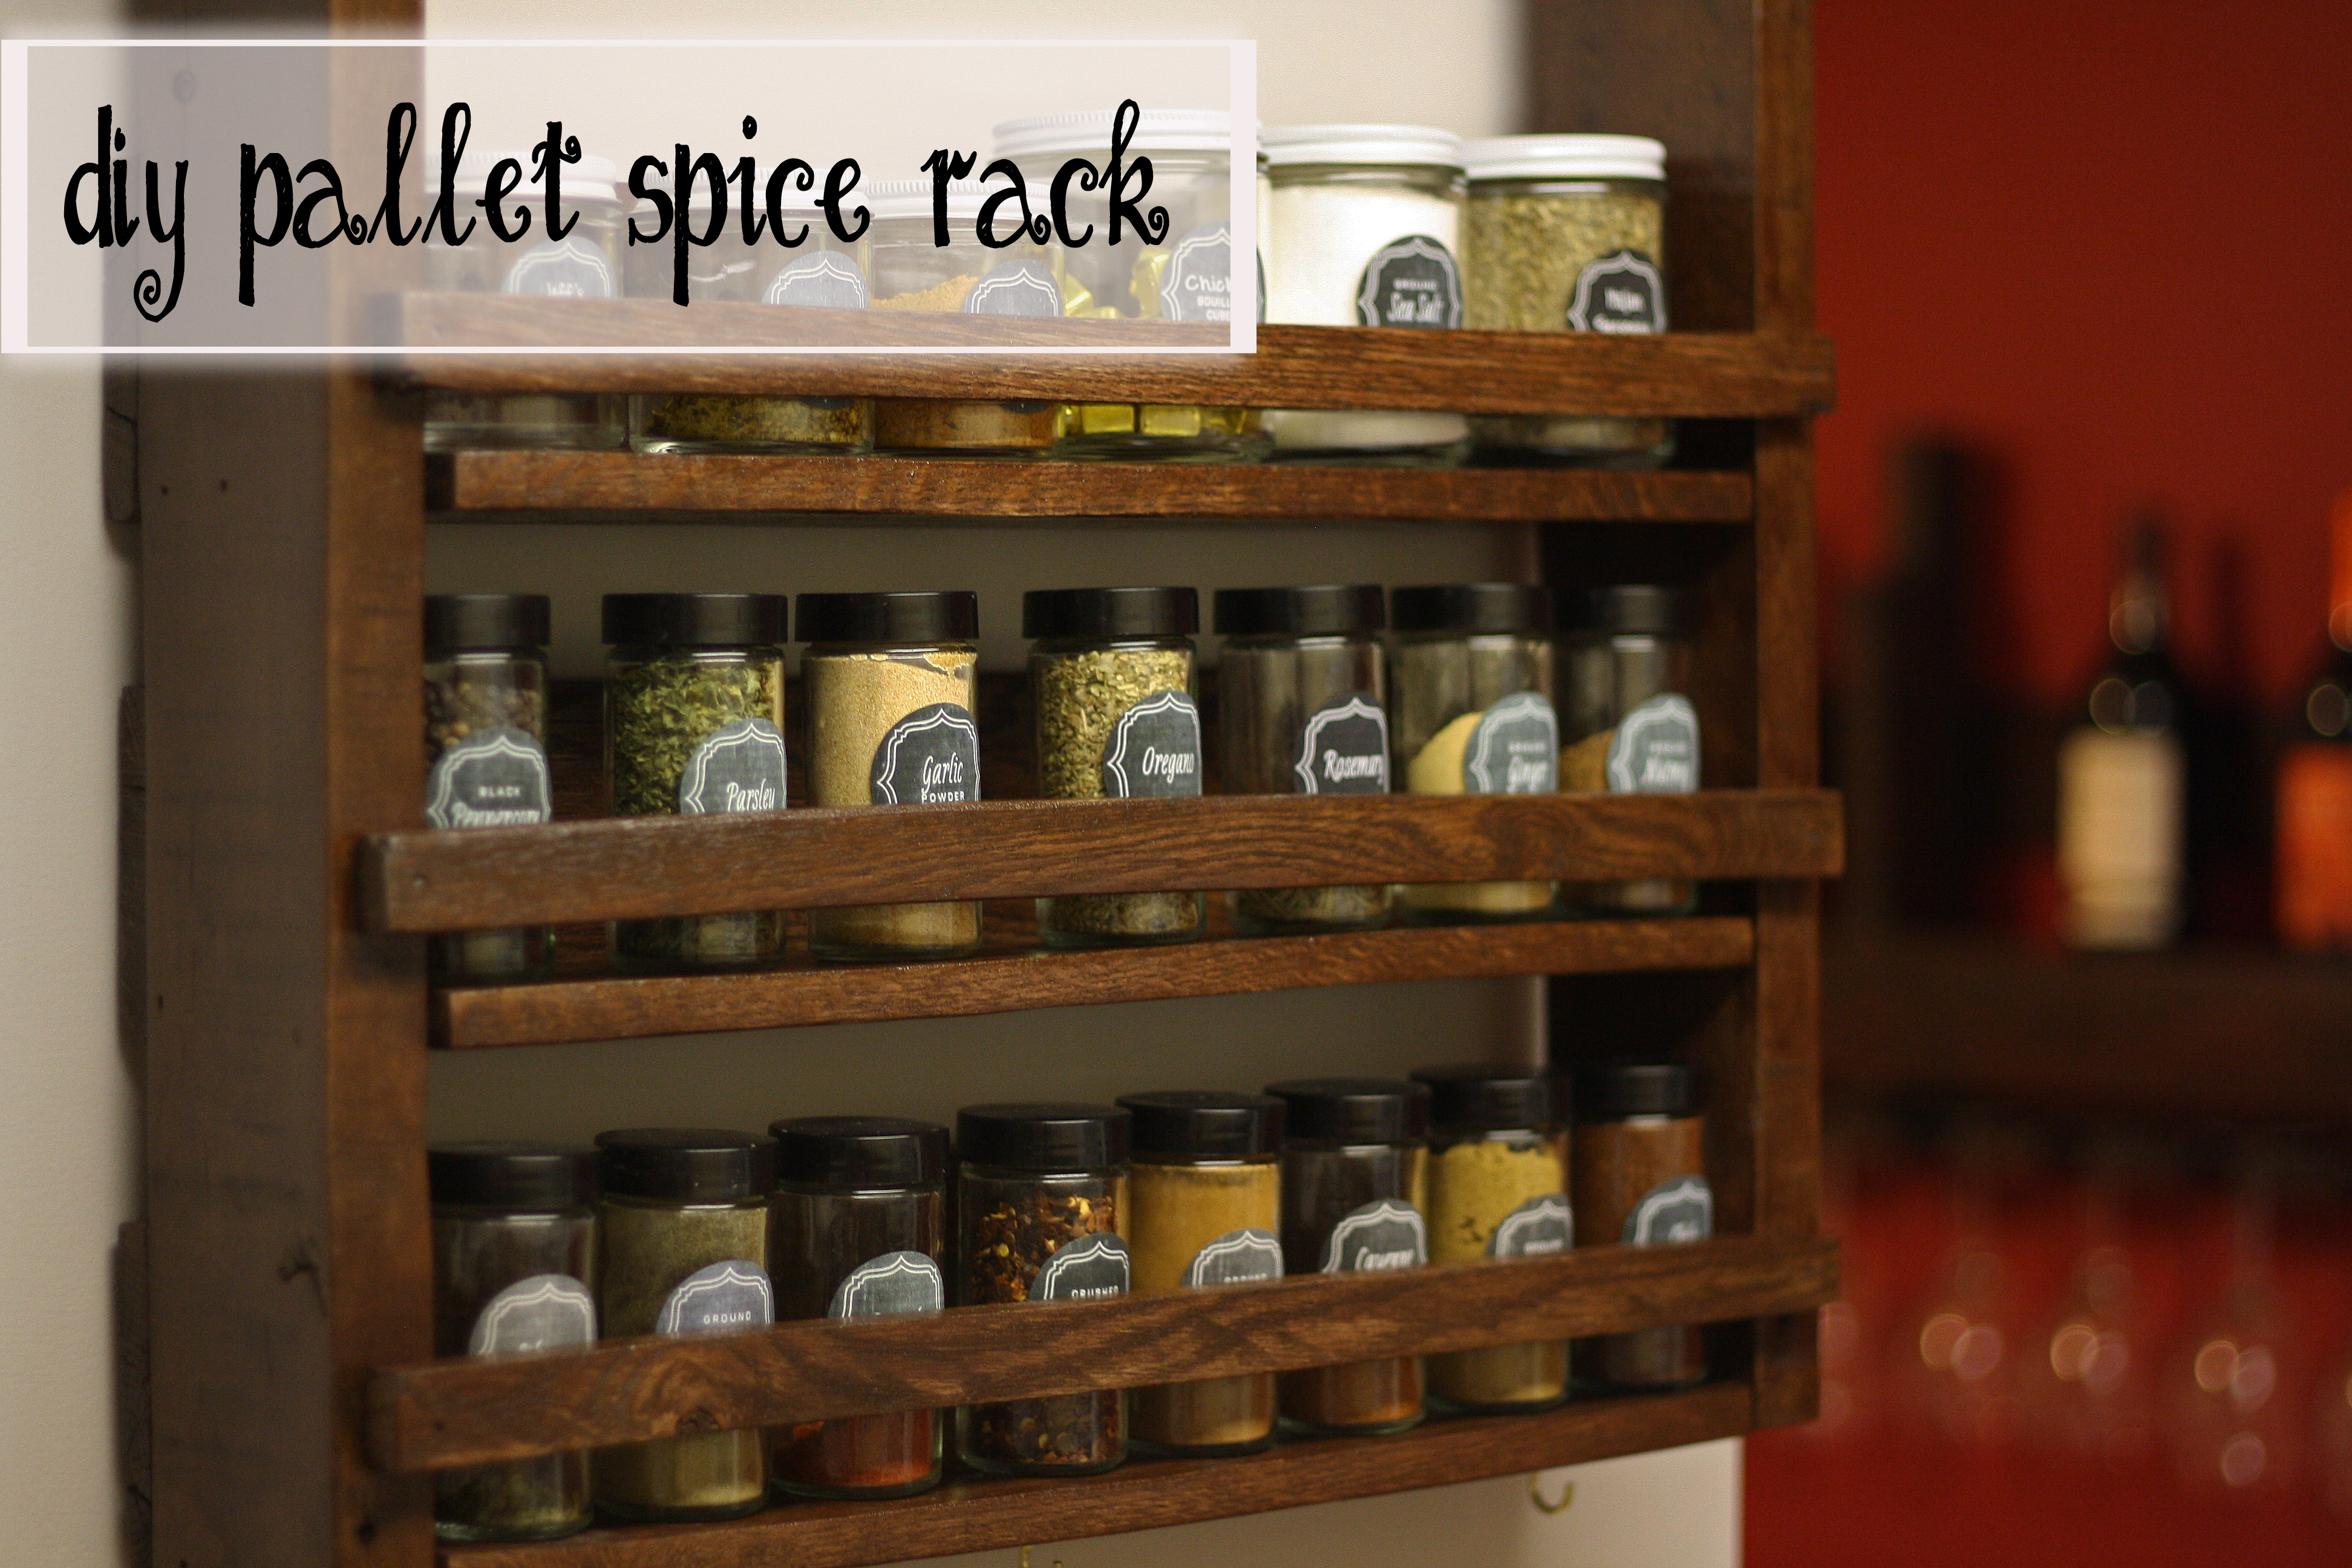 Home - Spice It Up!